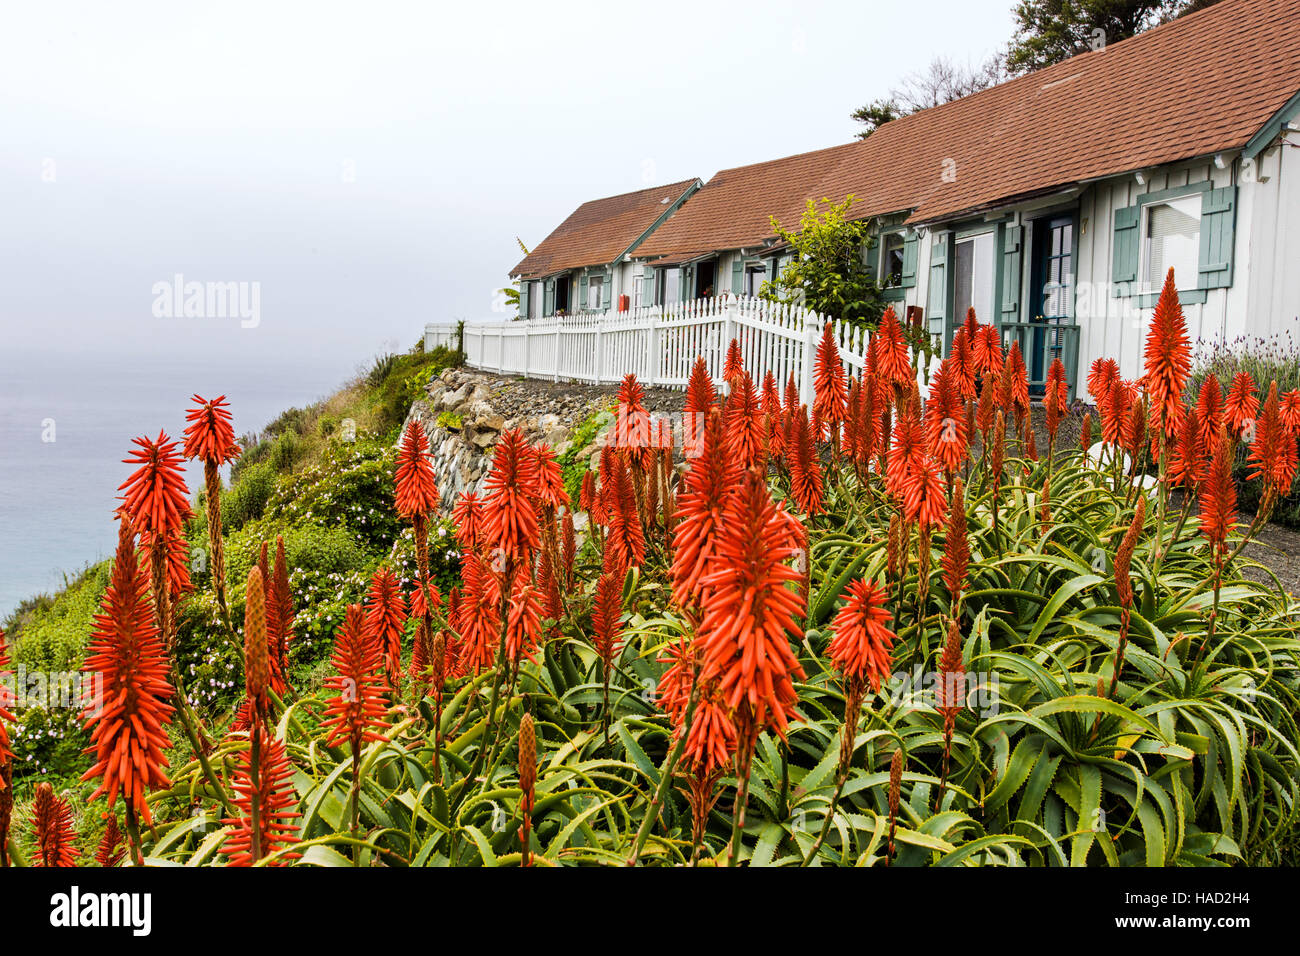 Aloe arborescens growing in a garden at the Lucia Lodge, Lucia, California, USA. Lucia is on the Big Sur coast & Pacific Ocean Stock Photo